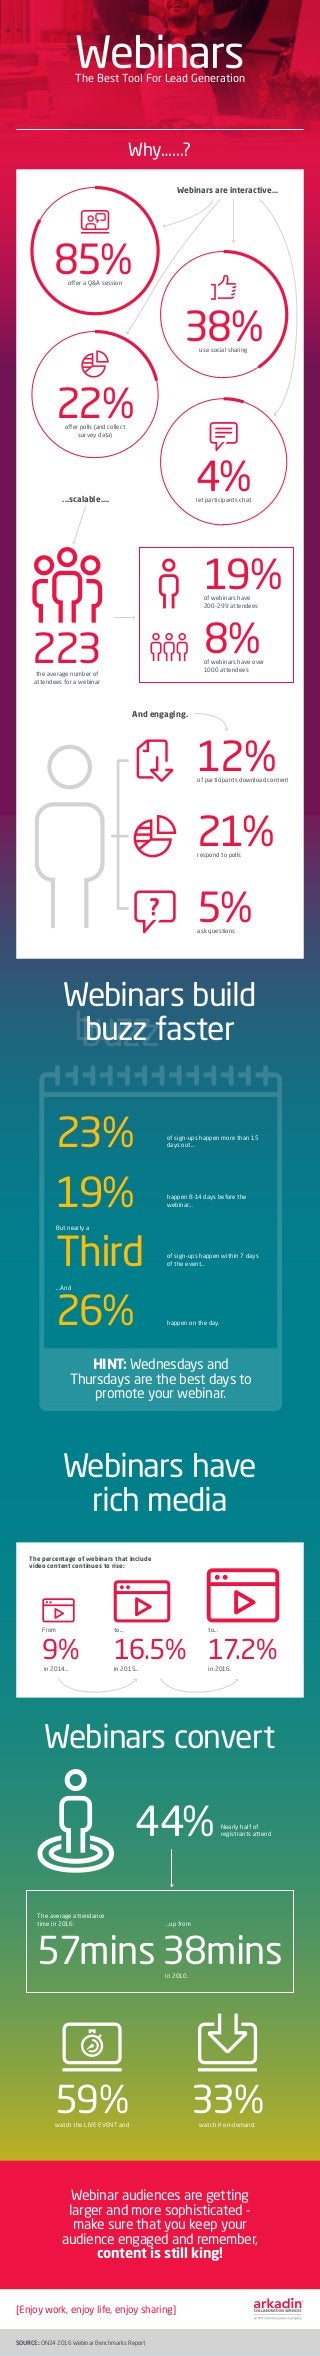 buzzbuzz
WebinarsThe Best Tool For Lead Generation
Why…...?
Webinars build
buzz faster
Webinars have
rich media
Webinars convert
Webinars are interactive…
85%offer a Q&A session
22%offer polls (and collect
survey data)
38%use social sharing
4%let participants chat...scalable….
19%of webinars have
200-299 attendees
8%of webinars have over
1000 attendees
223the average number of
attendees for a webinar
And engaging.
12%of participants download content
21%respond to polls
5%ask questions
23% of sign-ups happen more than 15
days out…
19% happen 8-14 days before the
webinar...
Third of sign-ups happen within 7 days
of the event…
But nearly a
HINT: Wednesdays and
Thursdays are the best days to
promote your webinar.
26% happen on the day.
...And
The percentage of webinars that include
video content continues to rise:
9%in 2014…
From
16.5%in 2015…
to...
17.2%in 2016.
to...
57mins
44% Nearly half of
registrants attend
The average attendance
time in 2016:
38mins
...up from
in 2010.
59%watch the LIVE EVENT and
33%watch it on-demand.
Webinar audiences are getting
larger and more sophisticated -
make sure that you keep your
audience engaged and remember,
content is still king!
SOURCE: ON24 2016 Webinar Benchmarks Report
[Enjoy work, enjoy life, enjoy sharing]
 